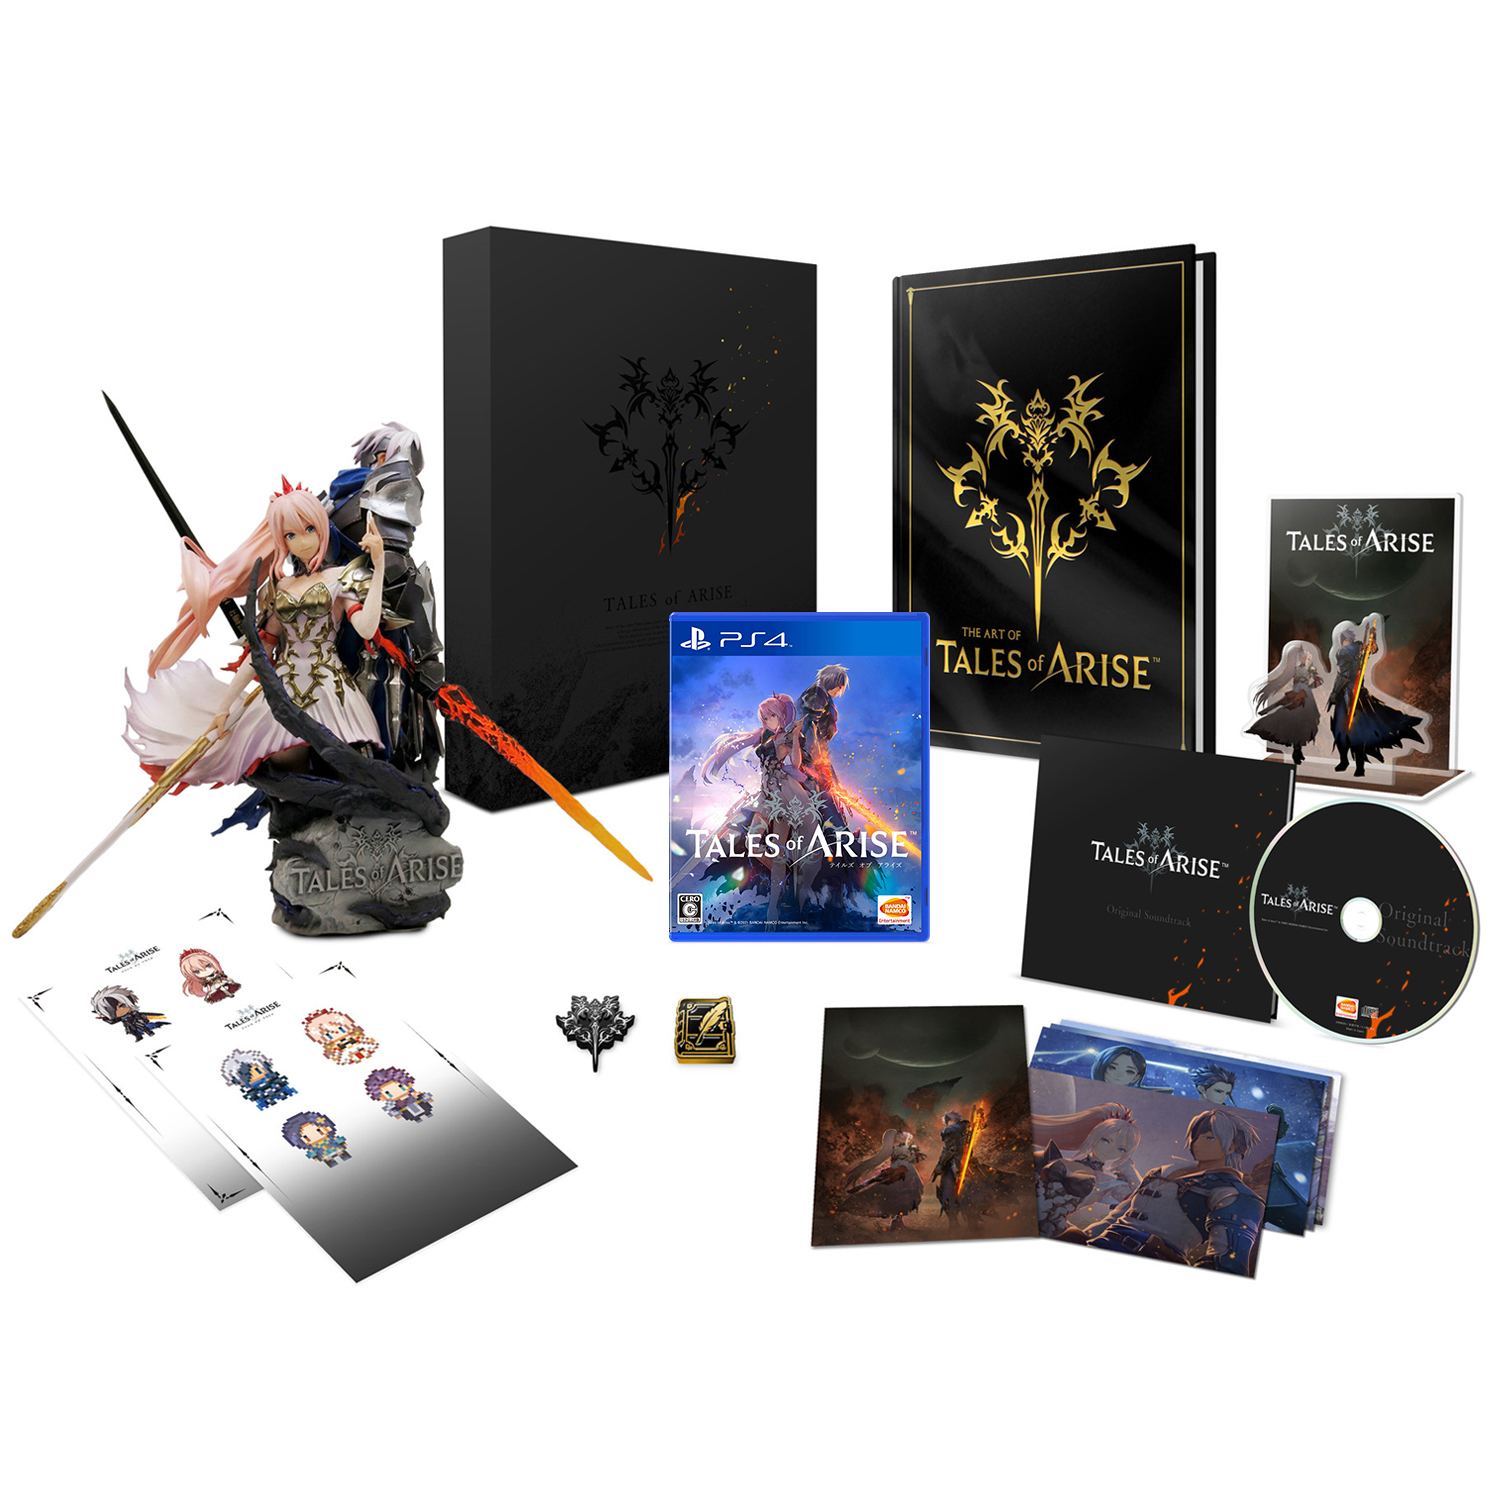 Tales of Arise [Collector's Edition] for PlayStation 4